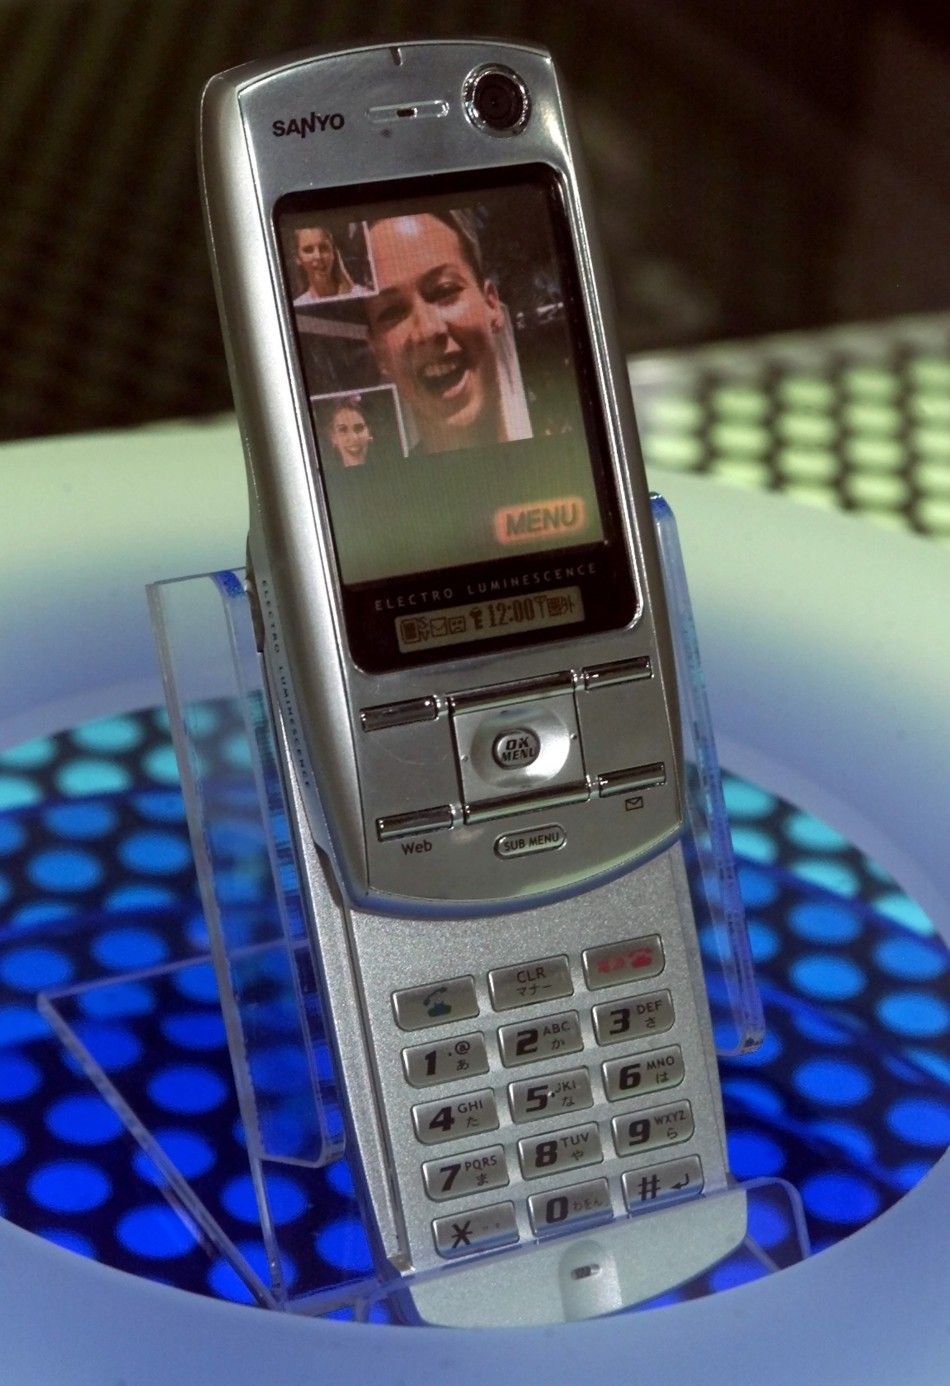 A third generation 3G cellular phone by Sanyo 